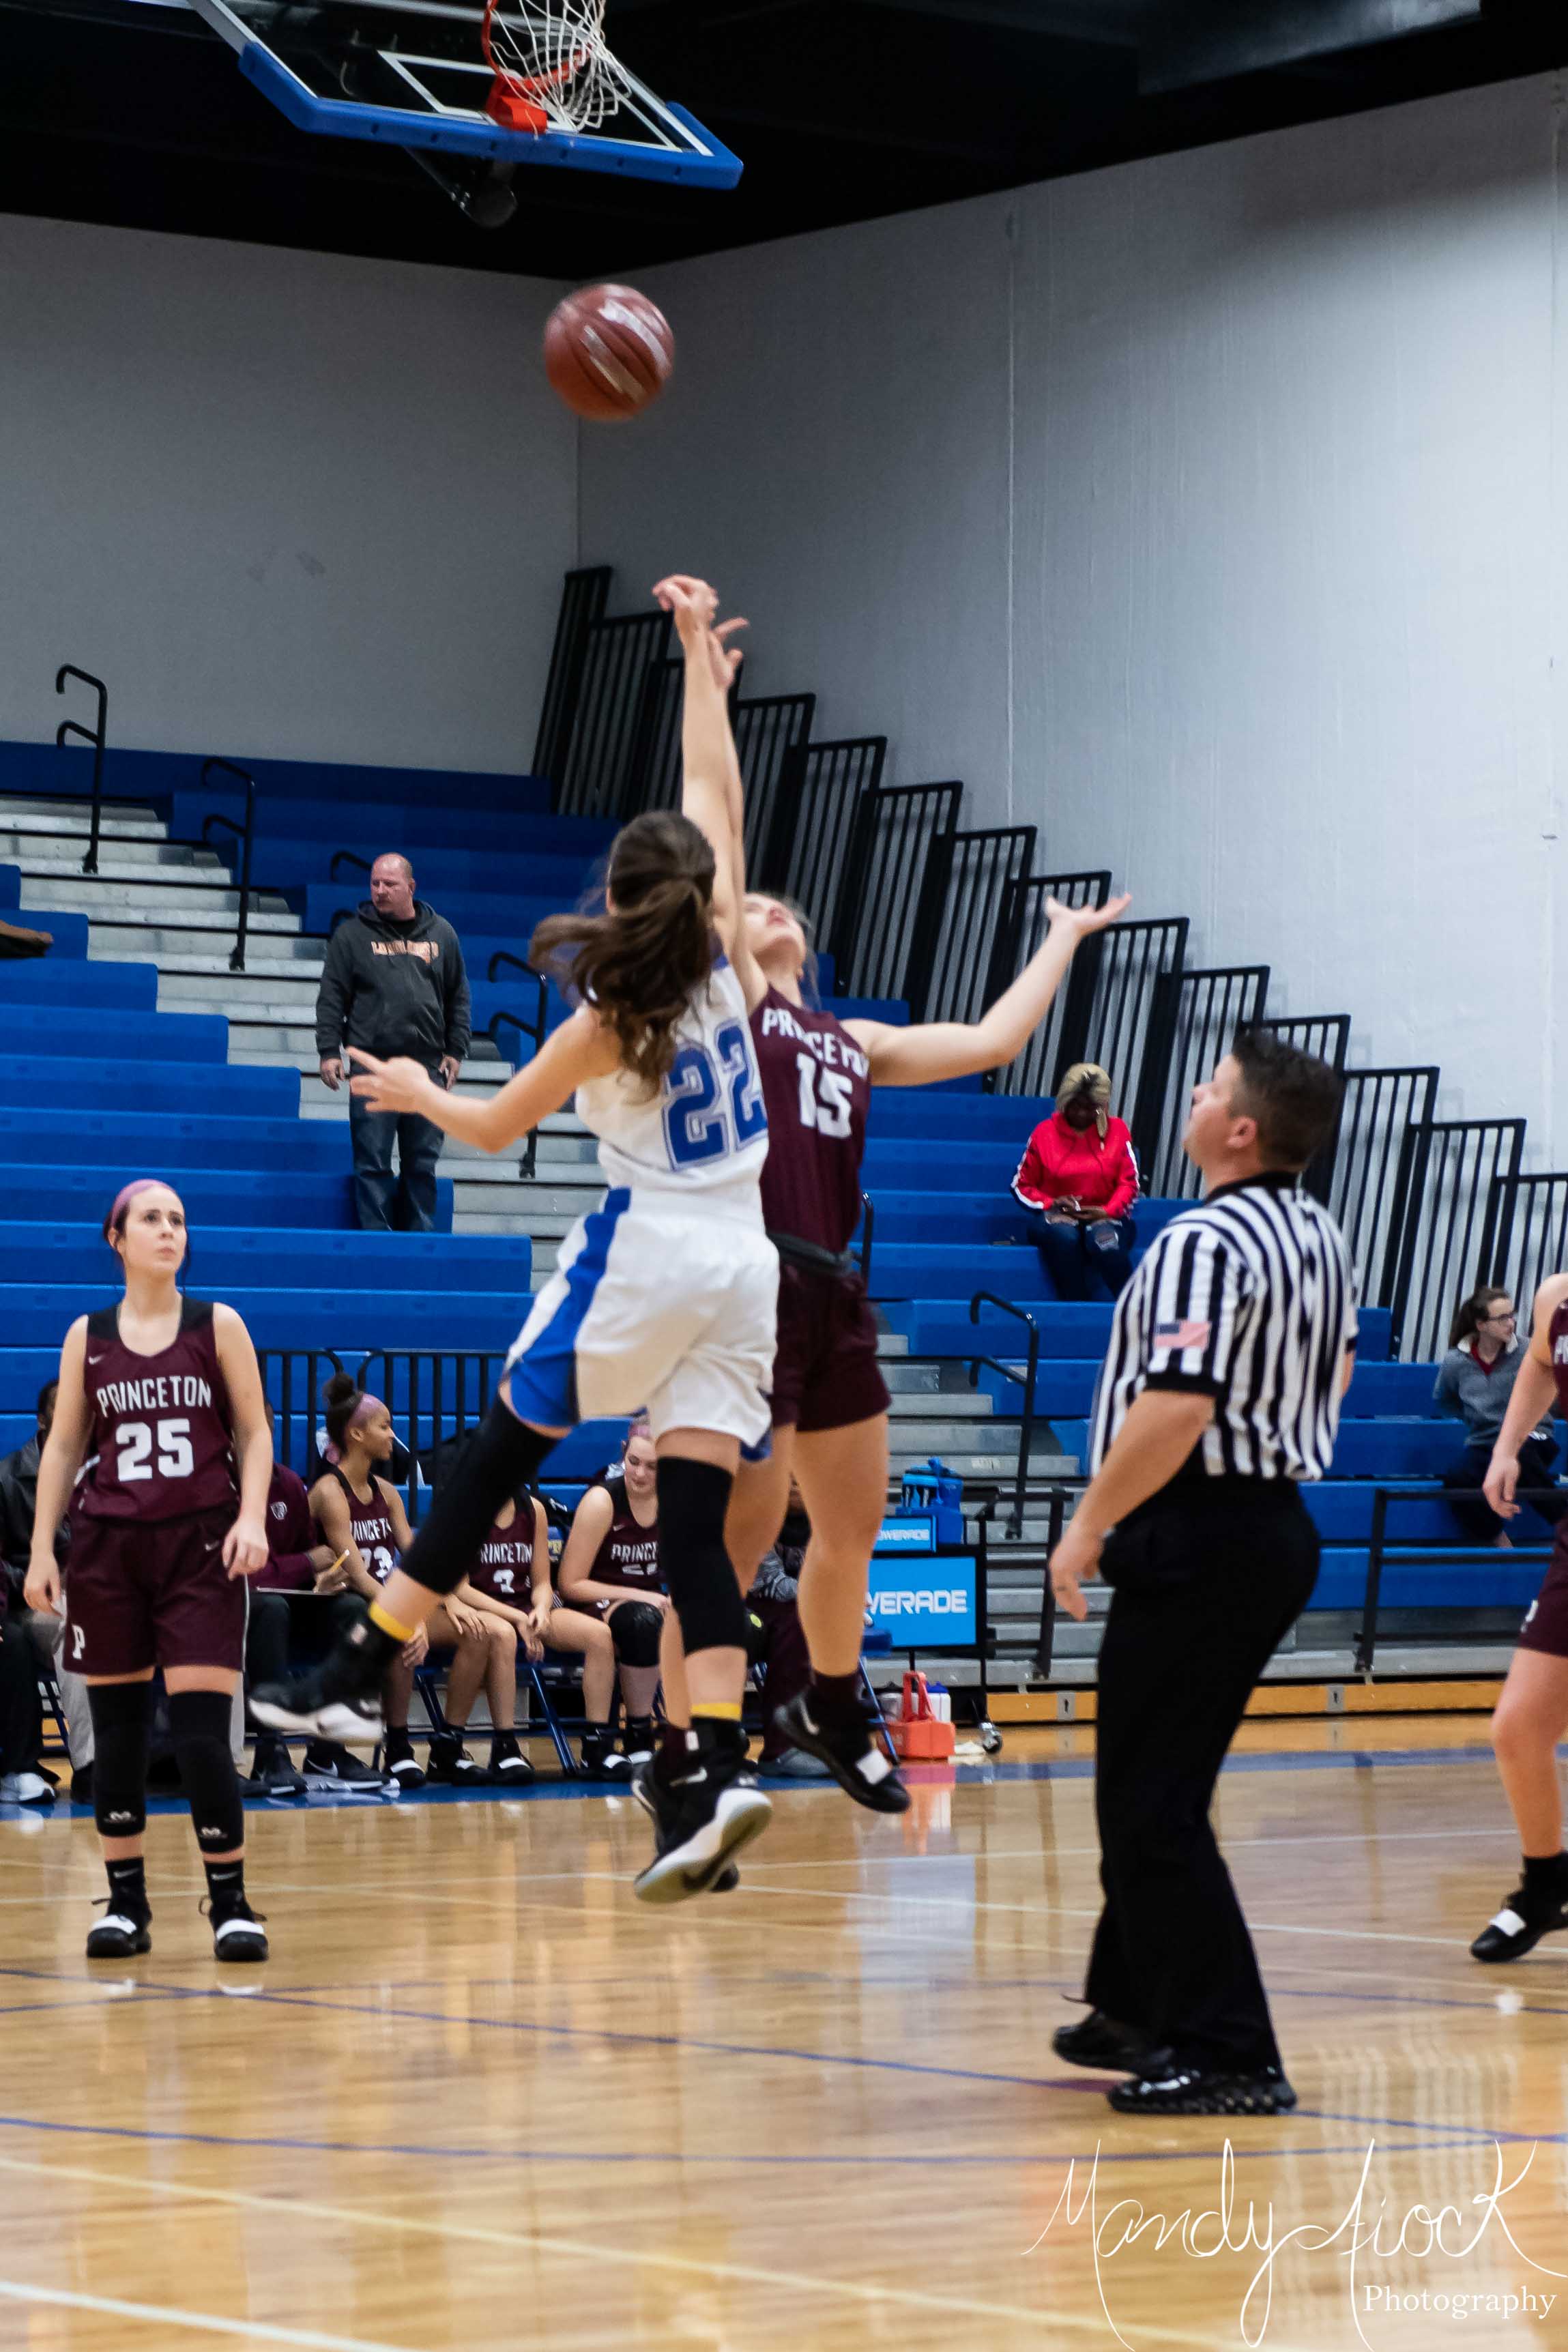 Local High School Varsity Basketball Results for January 22nd, 2019 Games